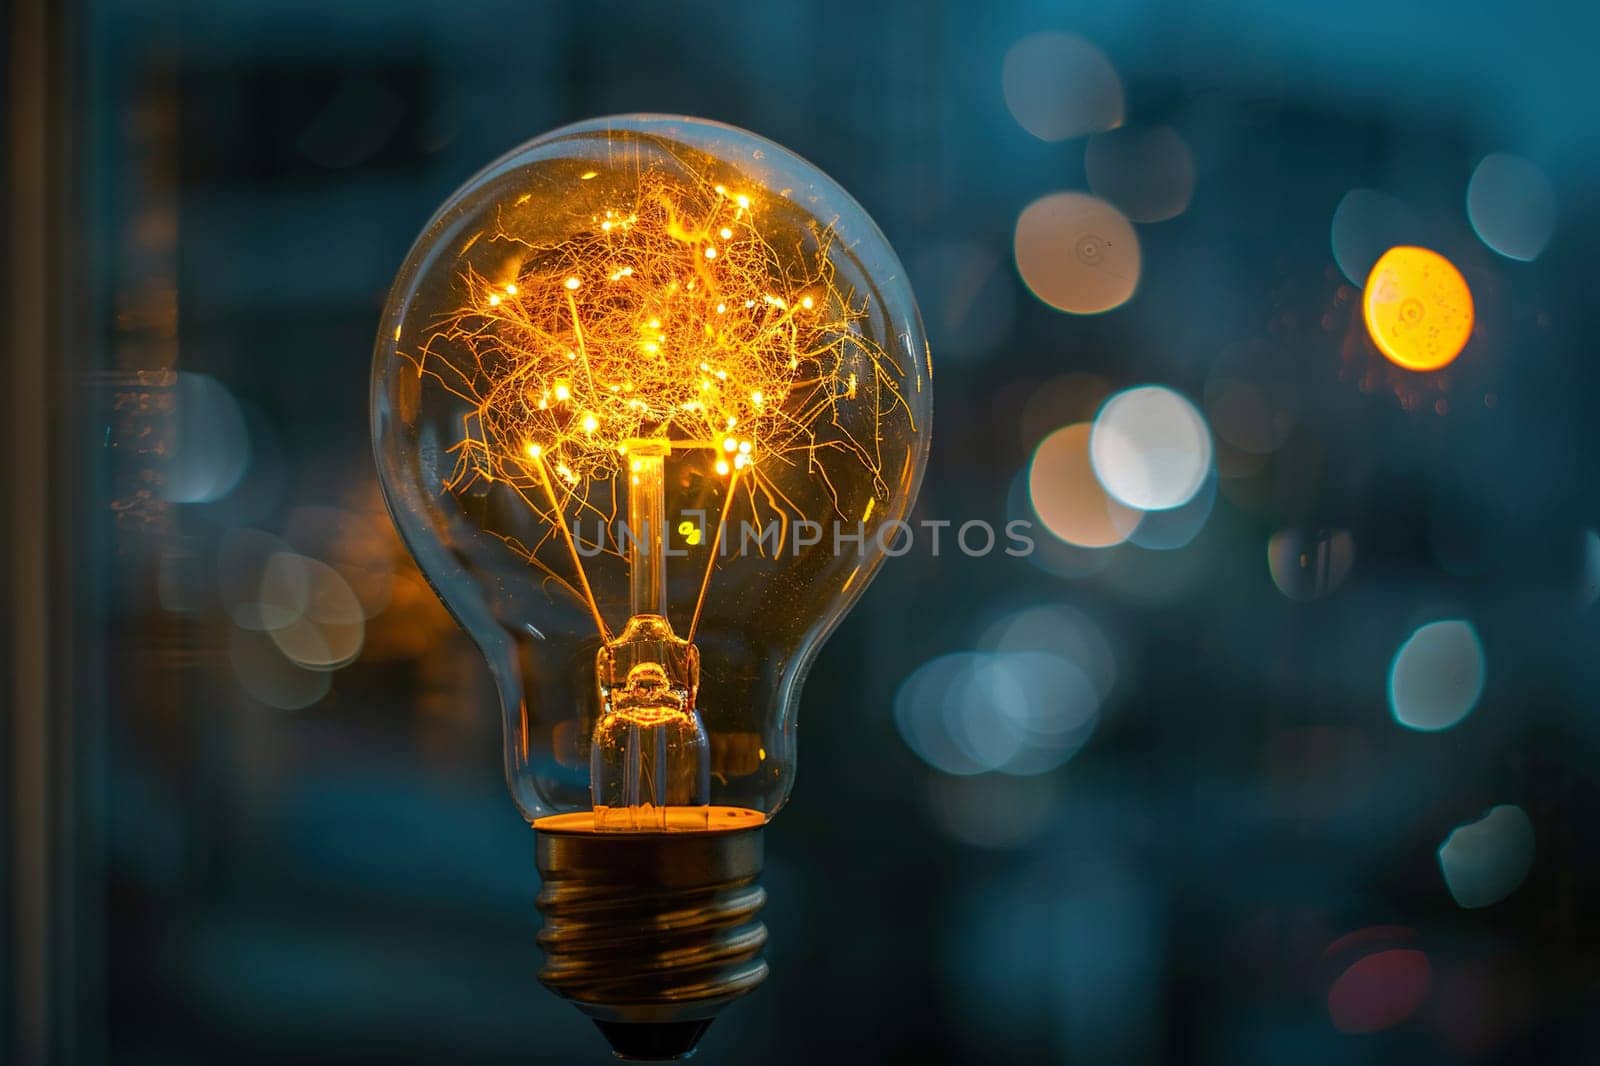 Light bulb with bright yellow light inside on a blurred background.